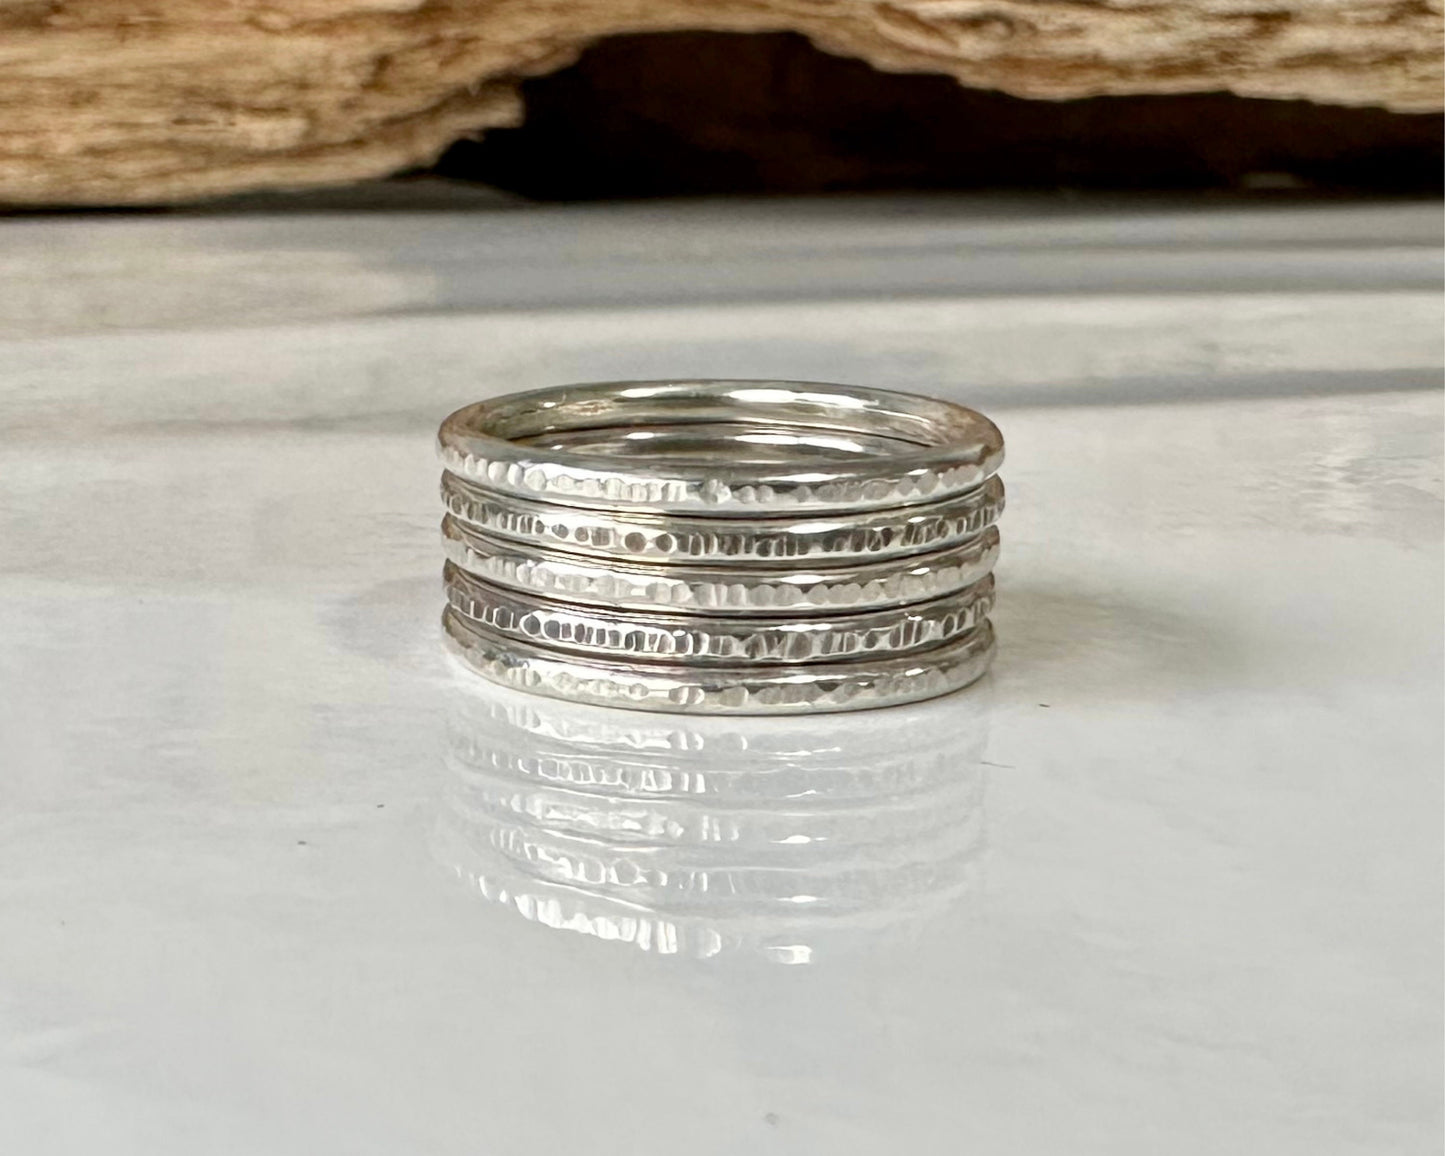 Oxodised 925 Sterling Silver Ring, Ripple Hammered Effect Minimalist Ring Band, 1.2mm, 1.5mm, 1.8mm, Oxodised Handmade Stacking Ring